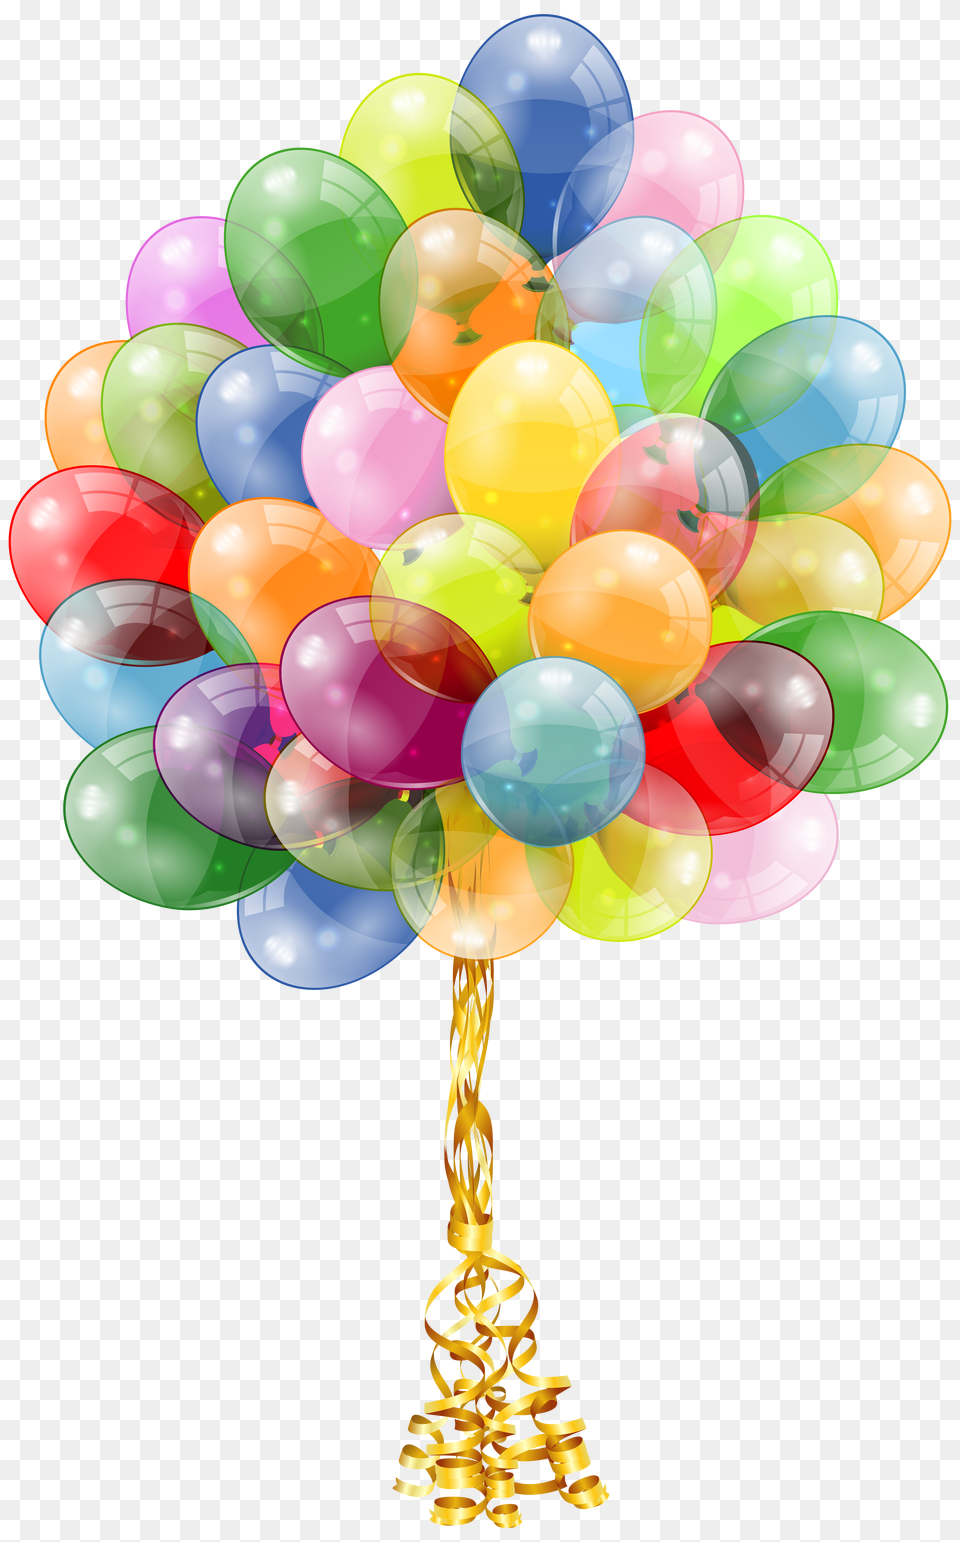 Colorful Balloons Download Image Arts Birthday Bunch Of Balloons Free Transparent Png